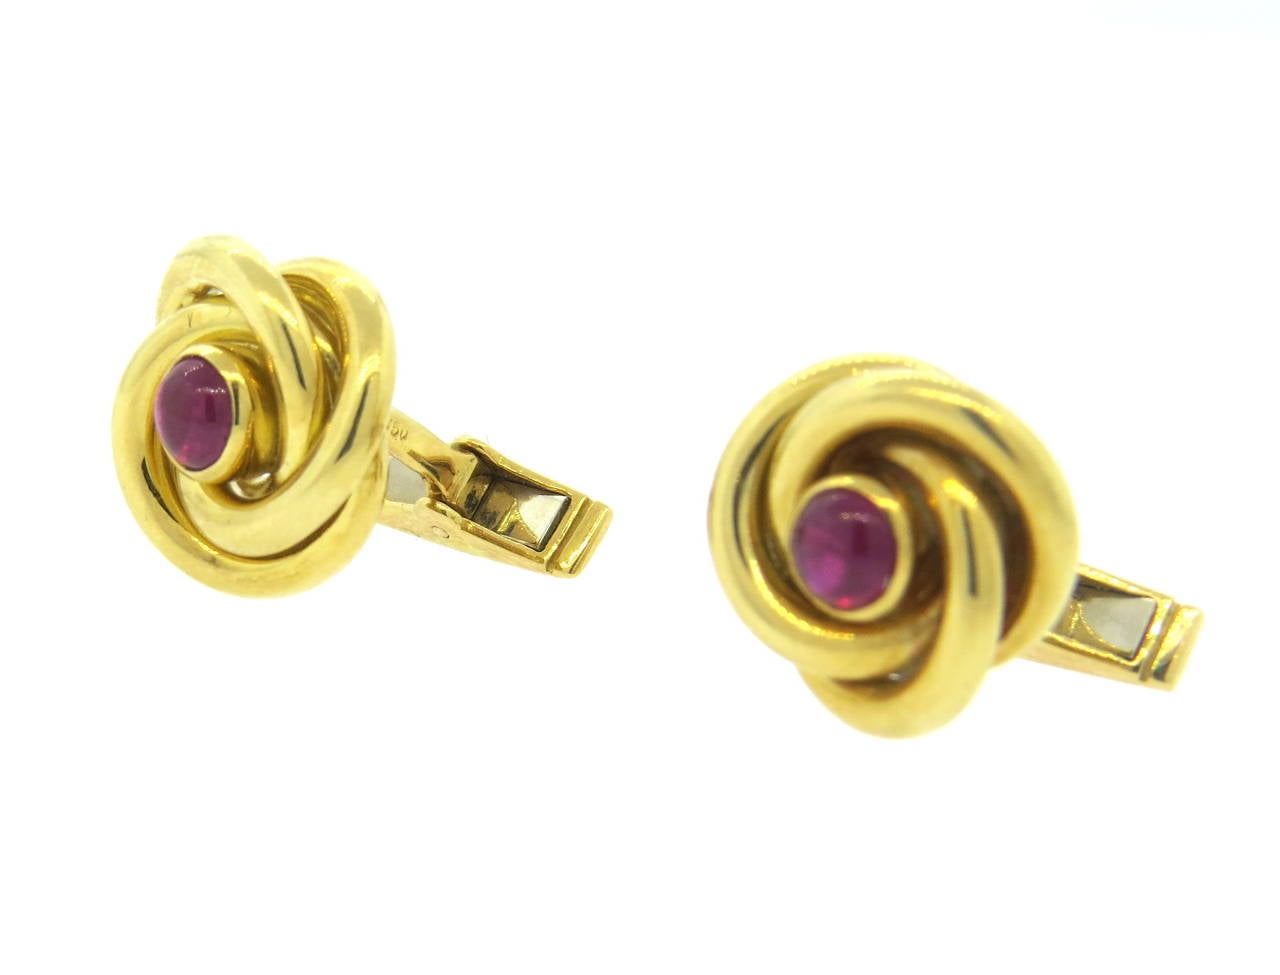 18k gold knot cufflinks, featuring 4.8mm ruby cabochons. Cufflink top is 15mm x 16mm. Weight - 14.8 grams